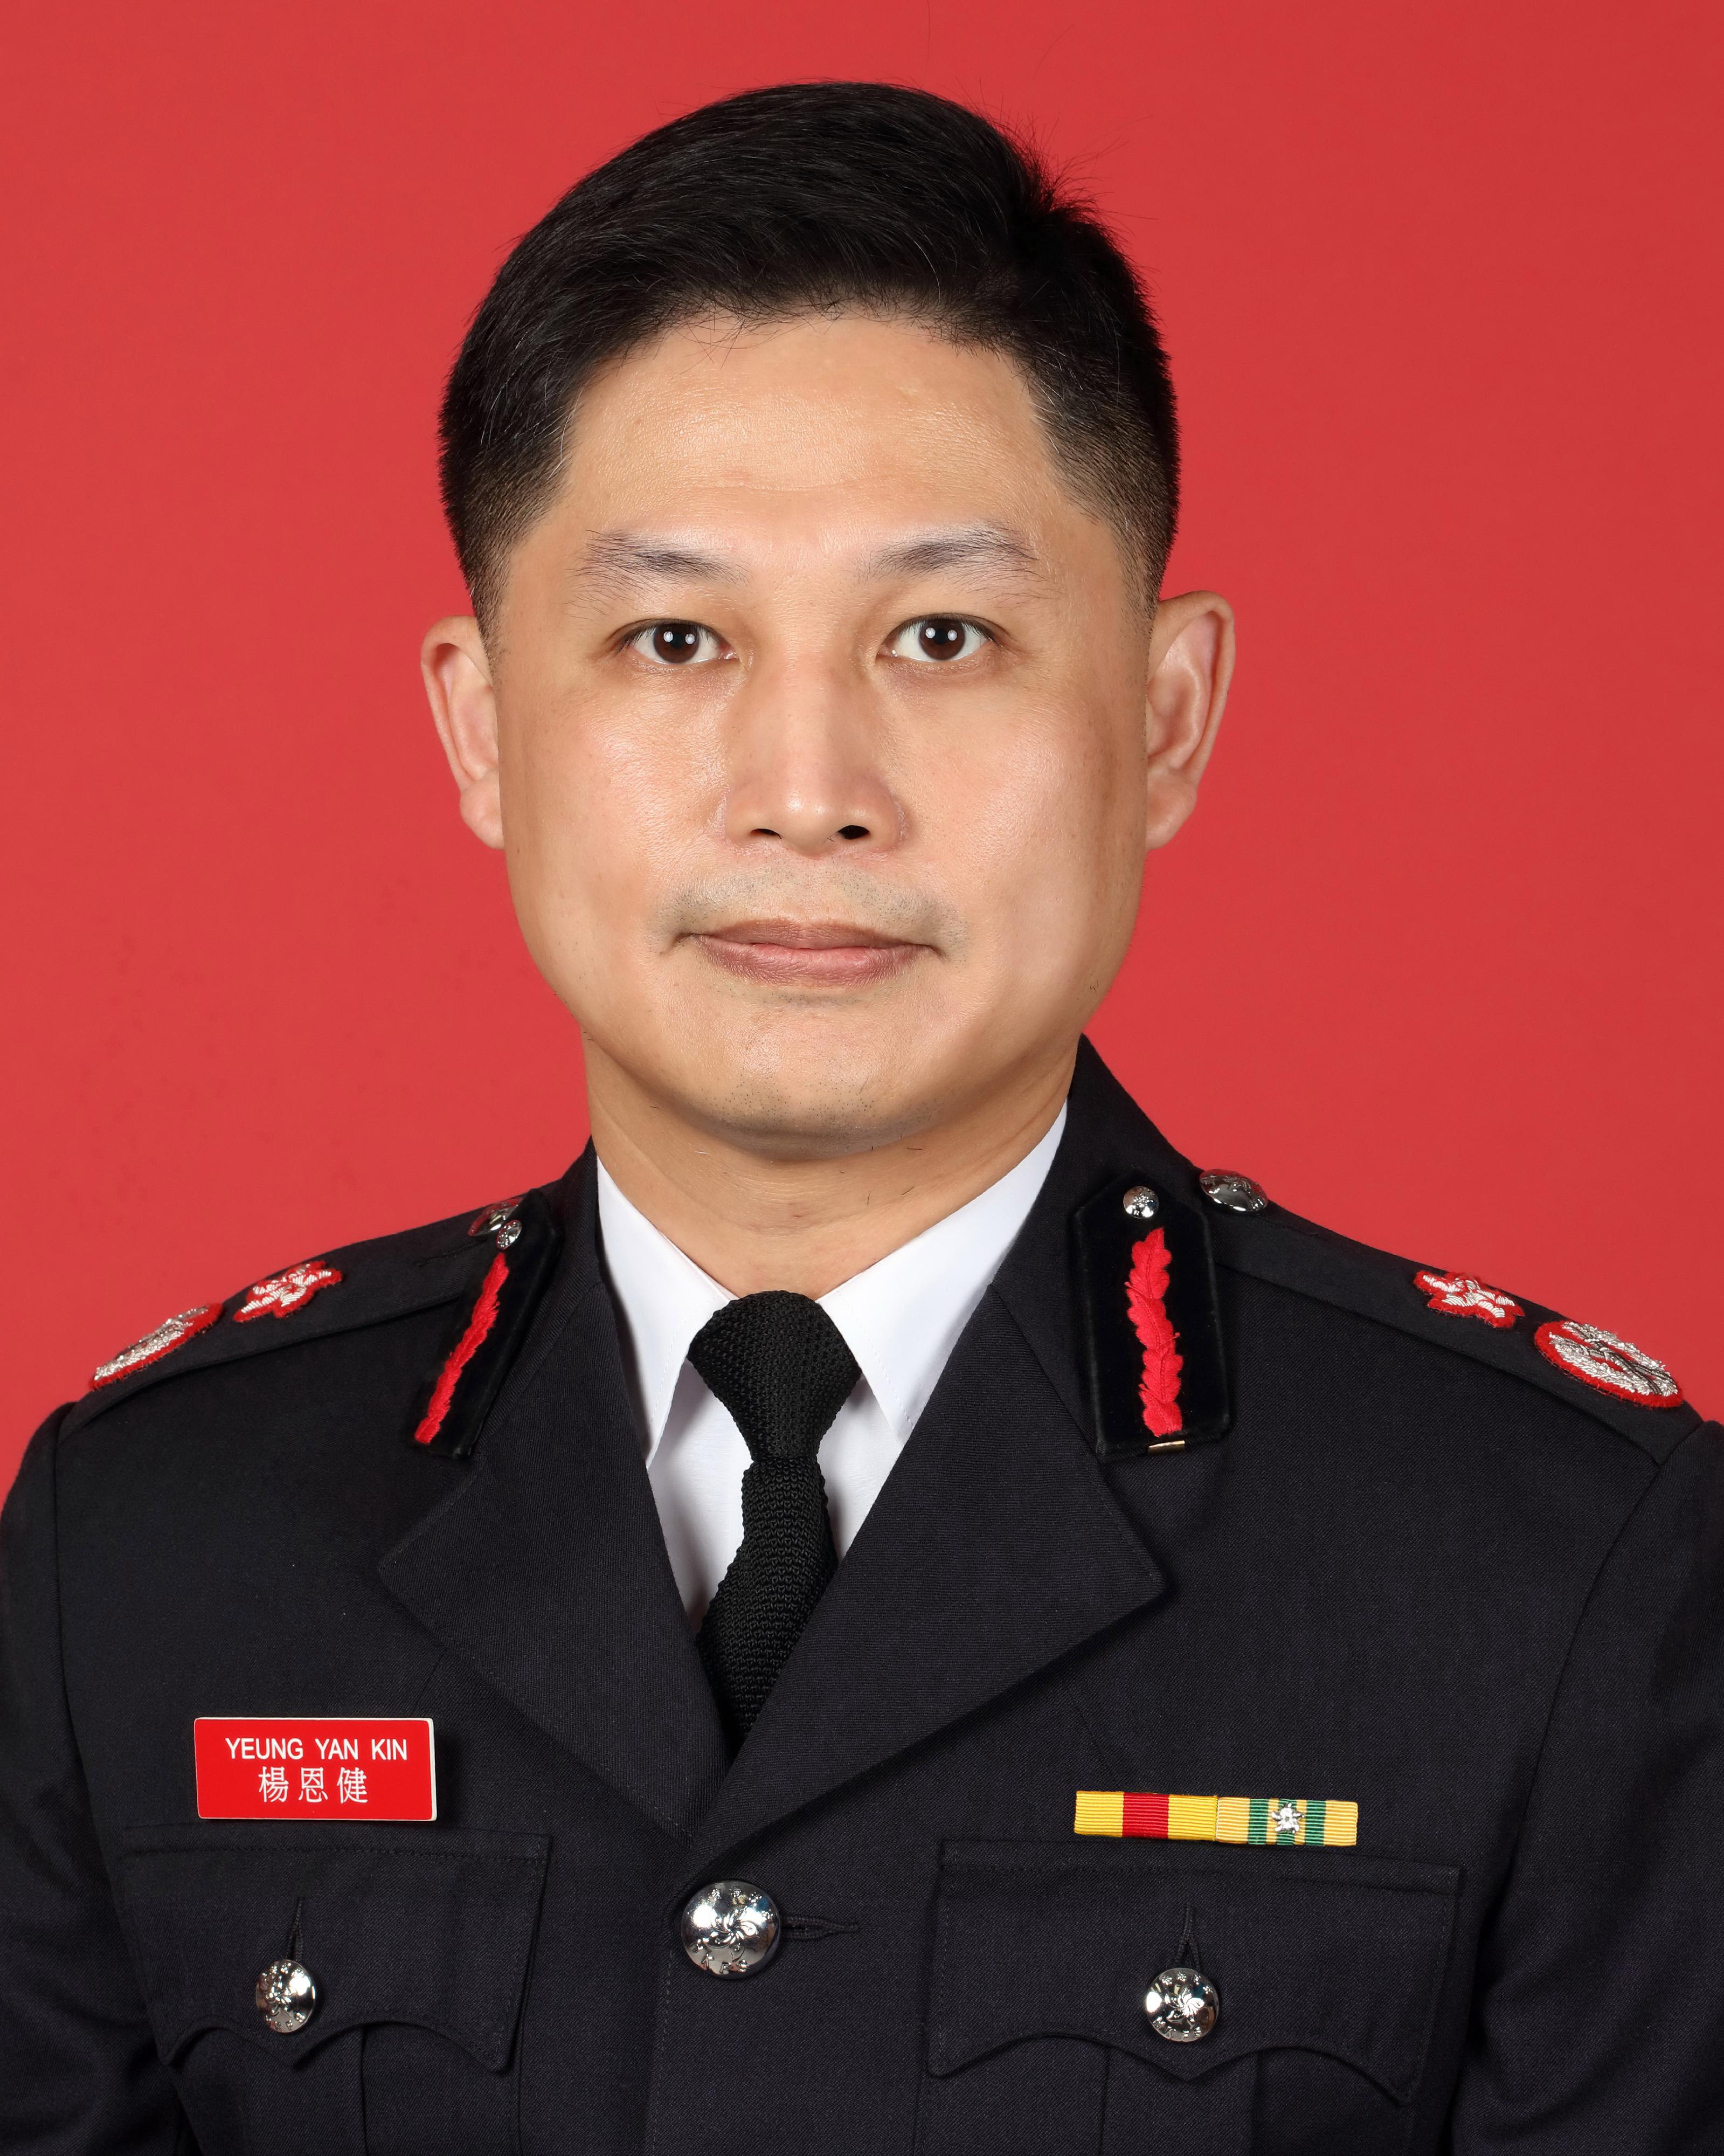 Mr Andy Yeung Yan-kin, Deputy Director of Fire Services, will take up the post of Director of Fire Services on March 26, 2022. 